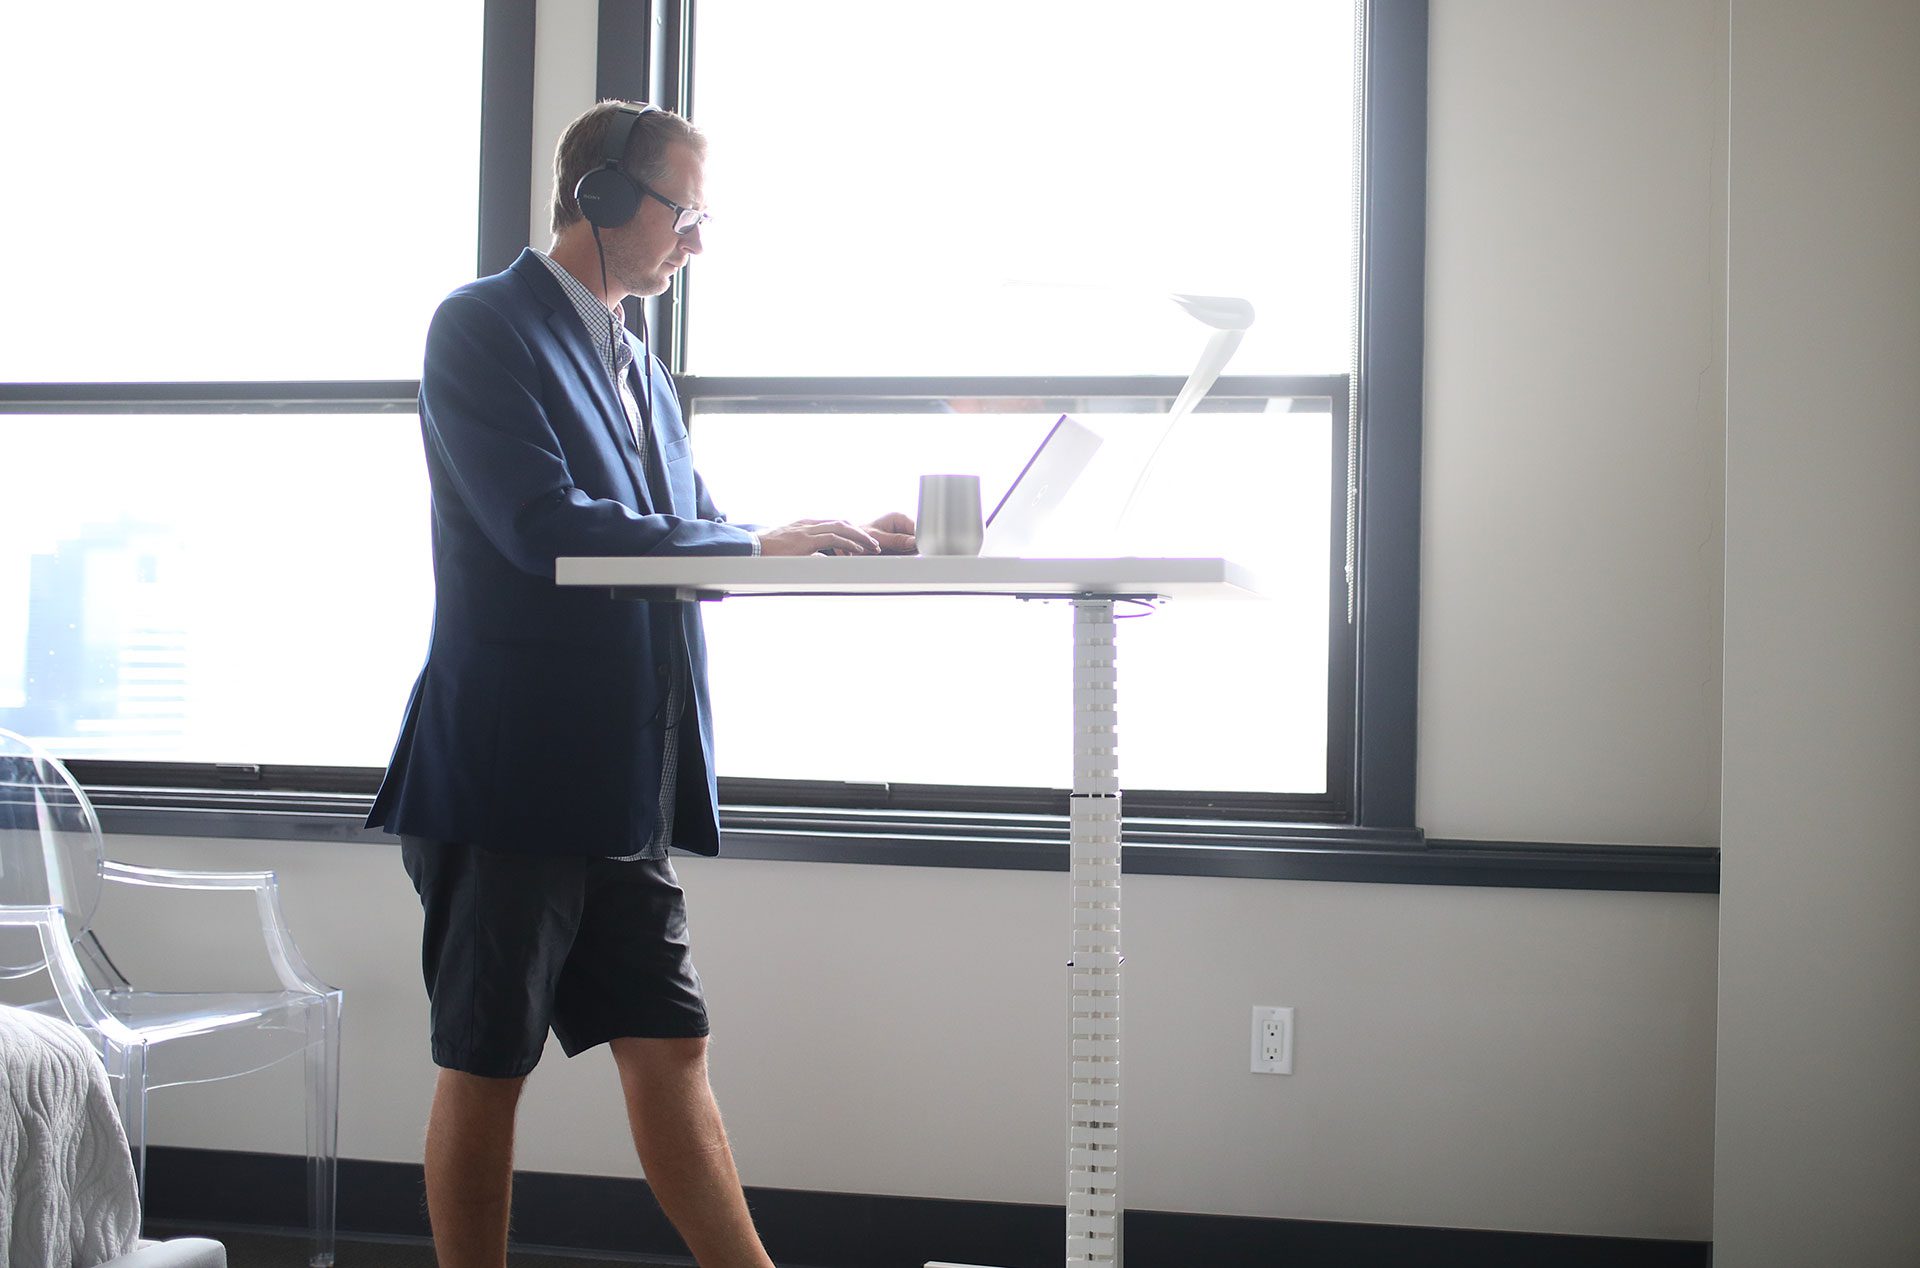 Pneumatic Standing Desks in Your Home Office